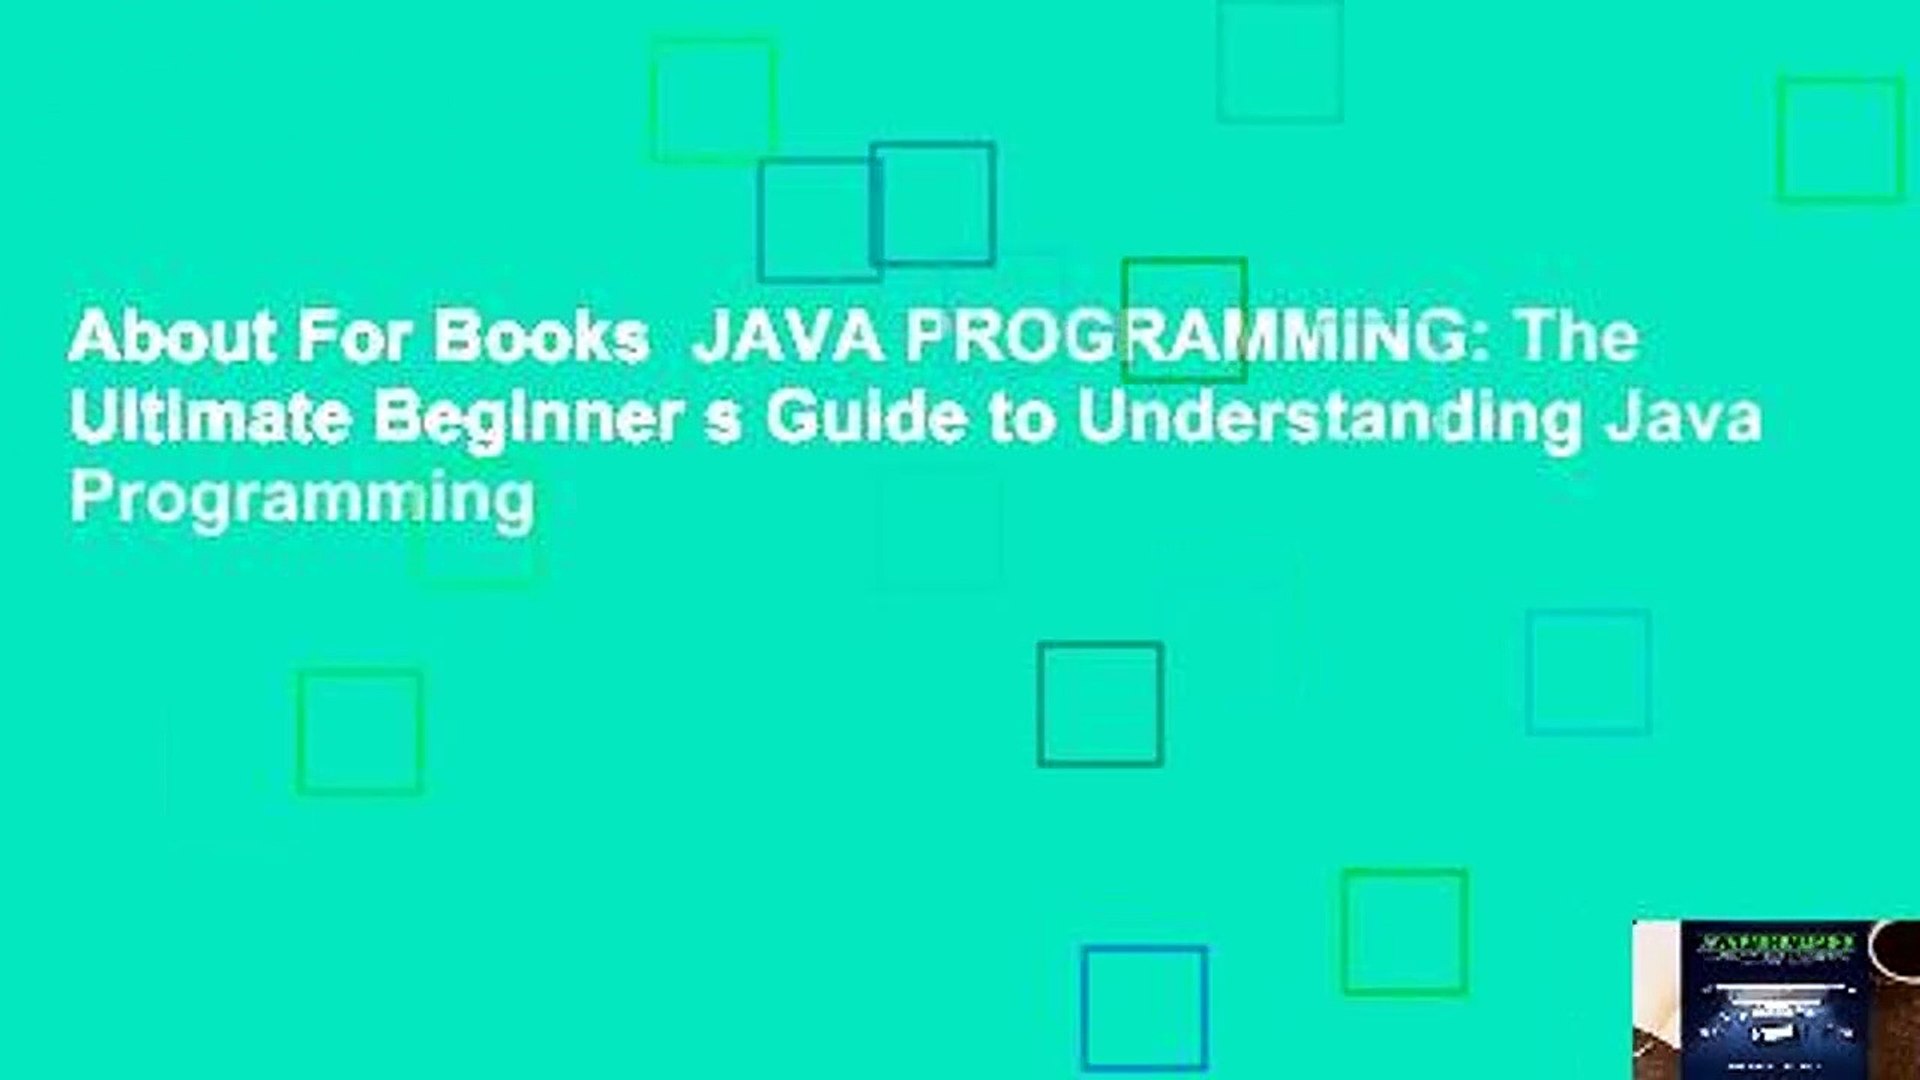 About For Books  JAVA PROGRAMMING: The Ultimate Beginner s Guide to Understanding Java Programming